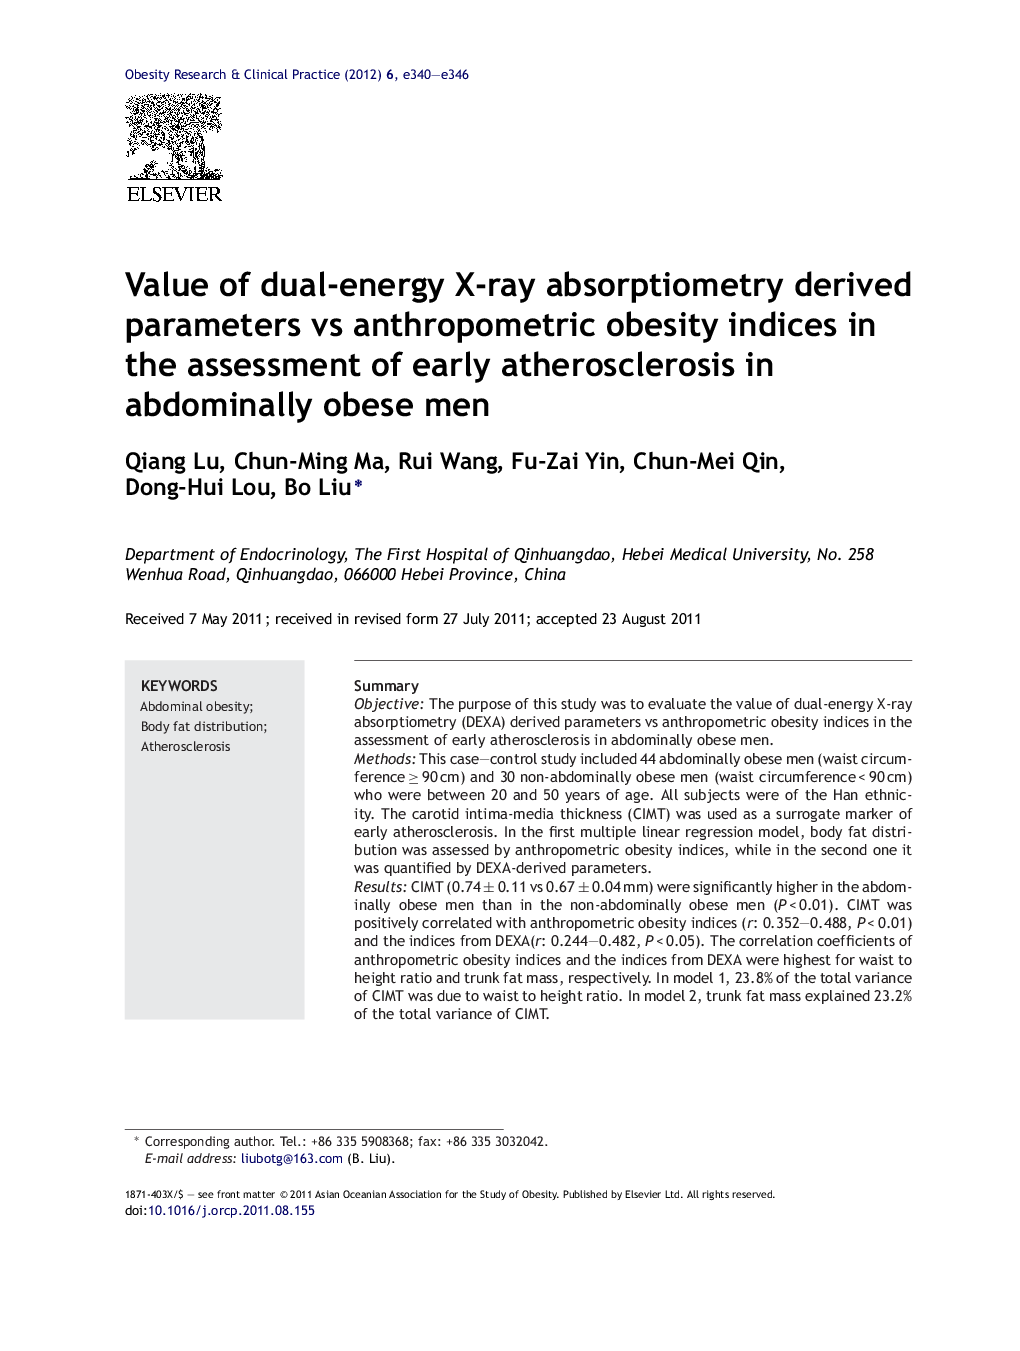 Value of dual-energy X-ray absorptiometry derived parameters vs anthropometric obesity indices in the assessment of early atherosclerosis in abdominally obese men